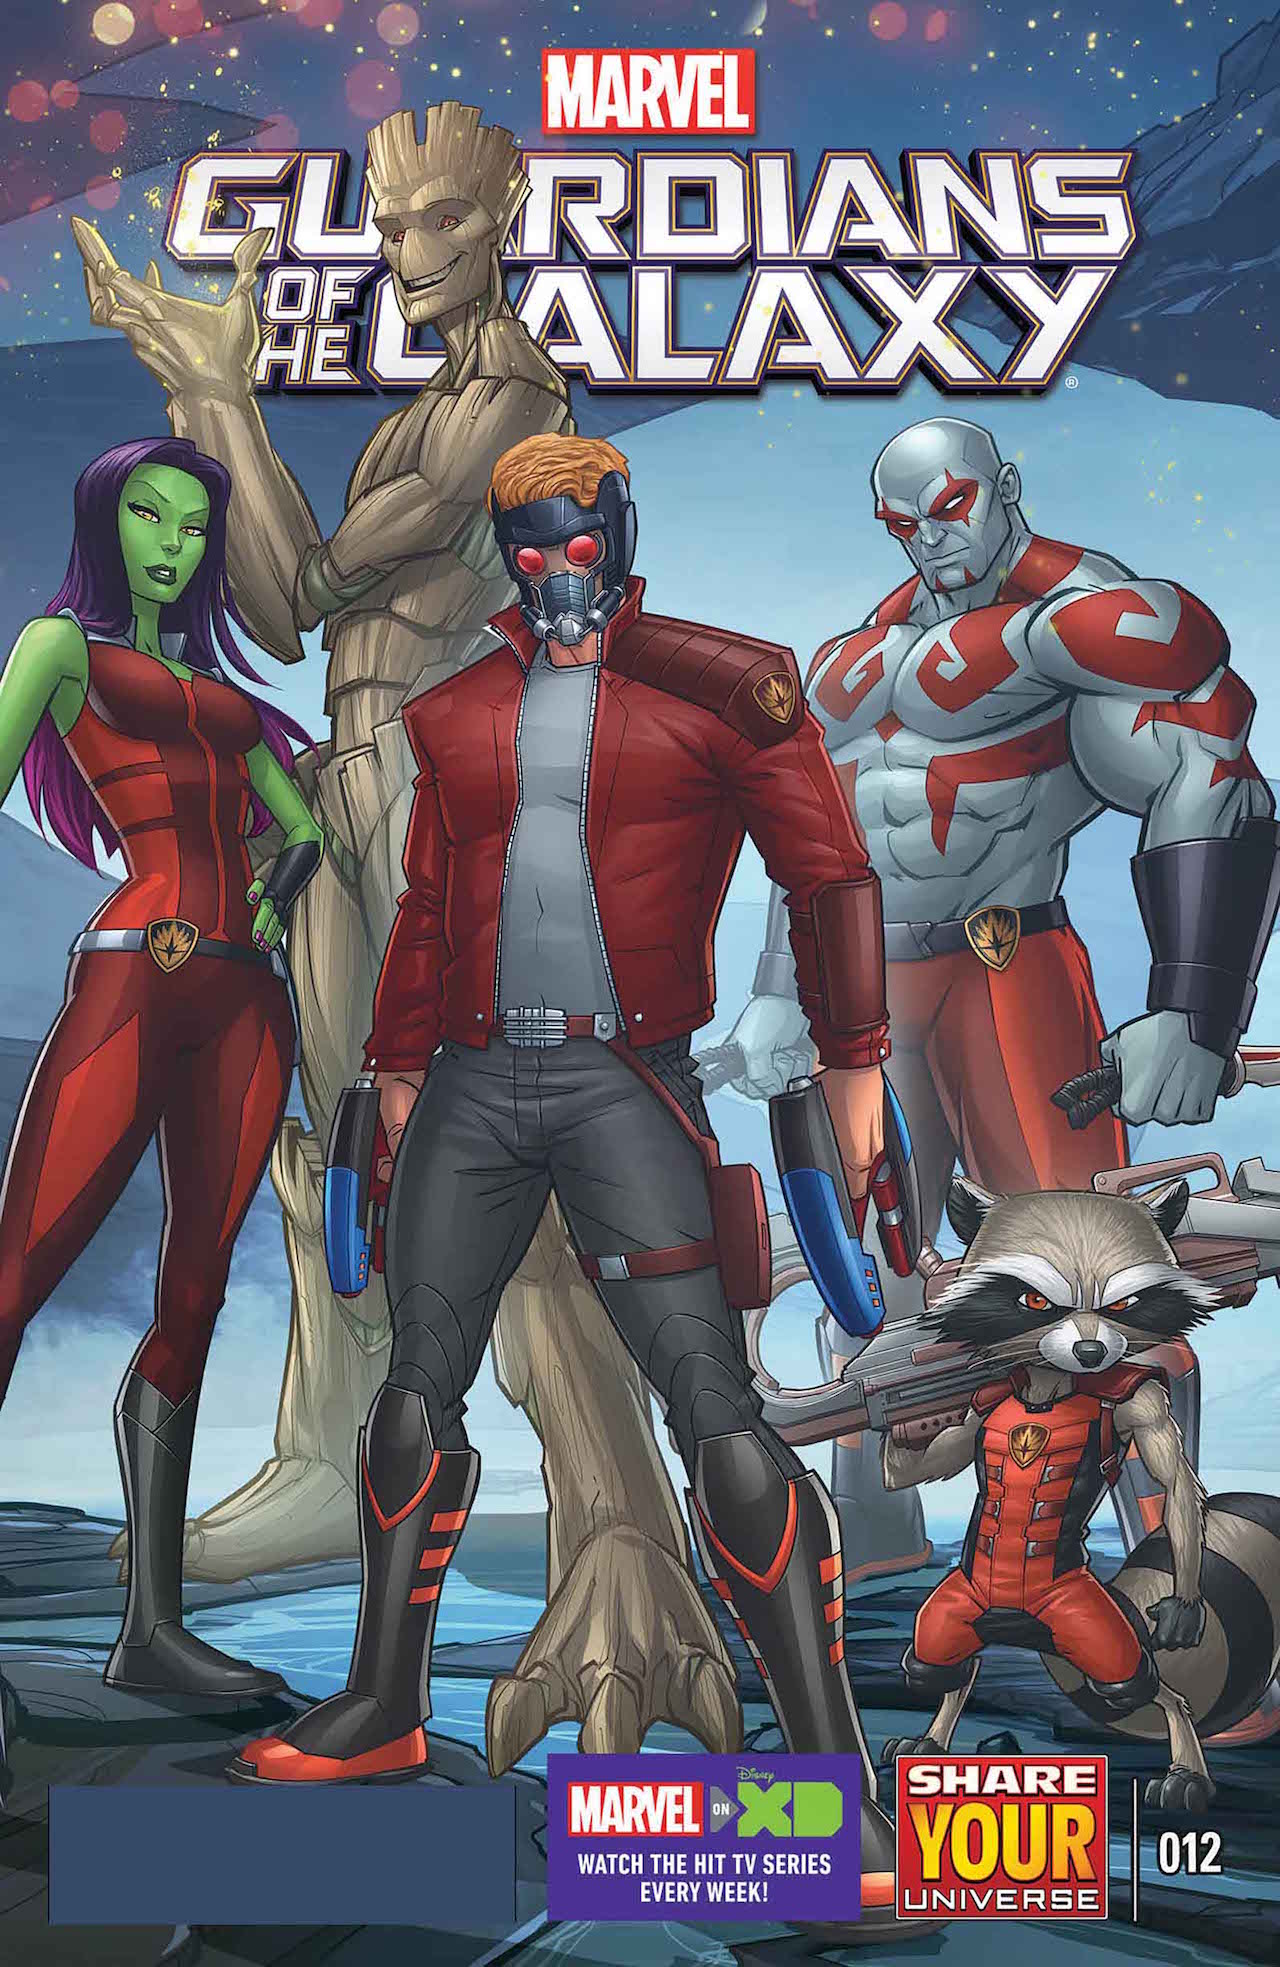 MARVEL UNIVERSE GUARDIANS OF THE GALAXY #12